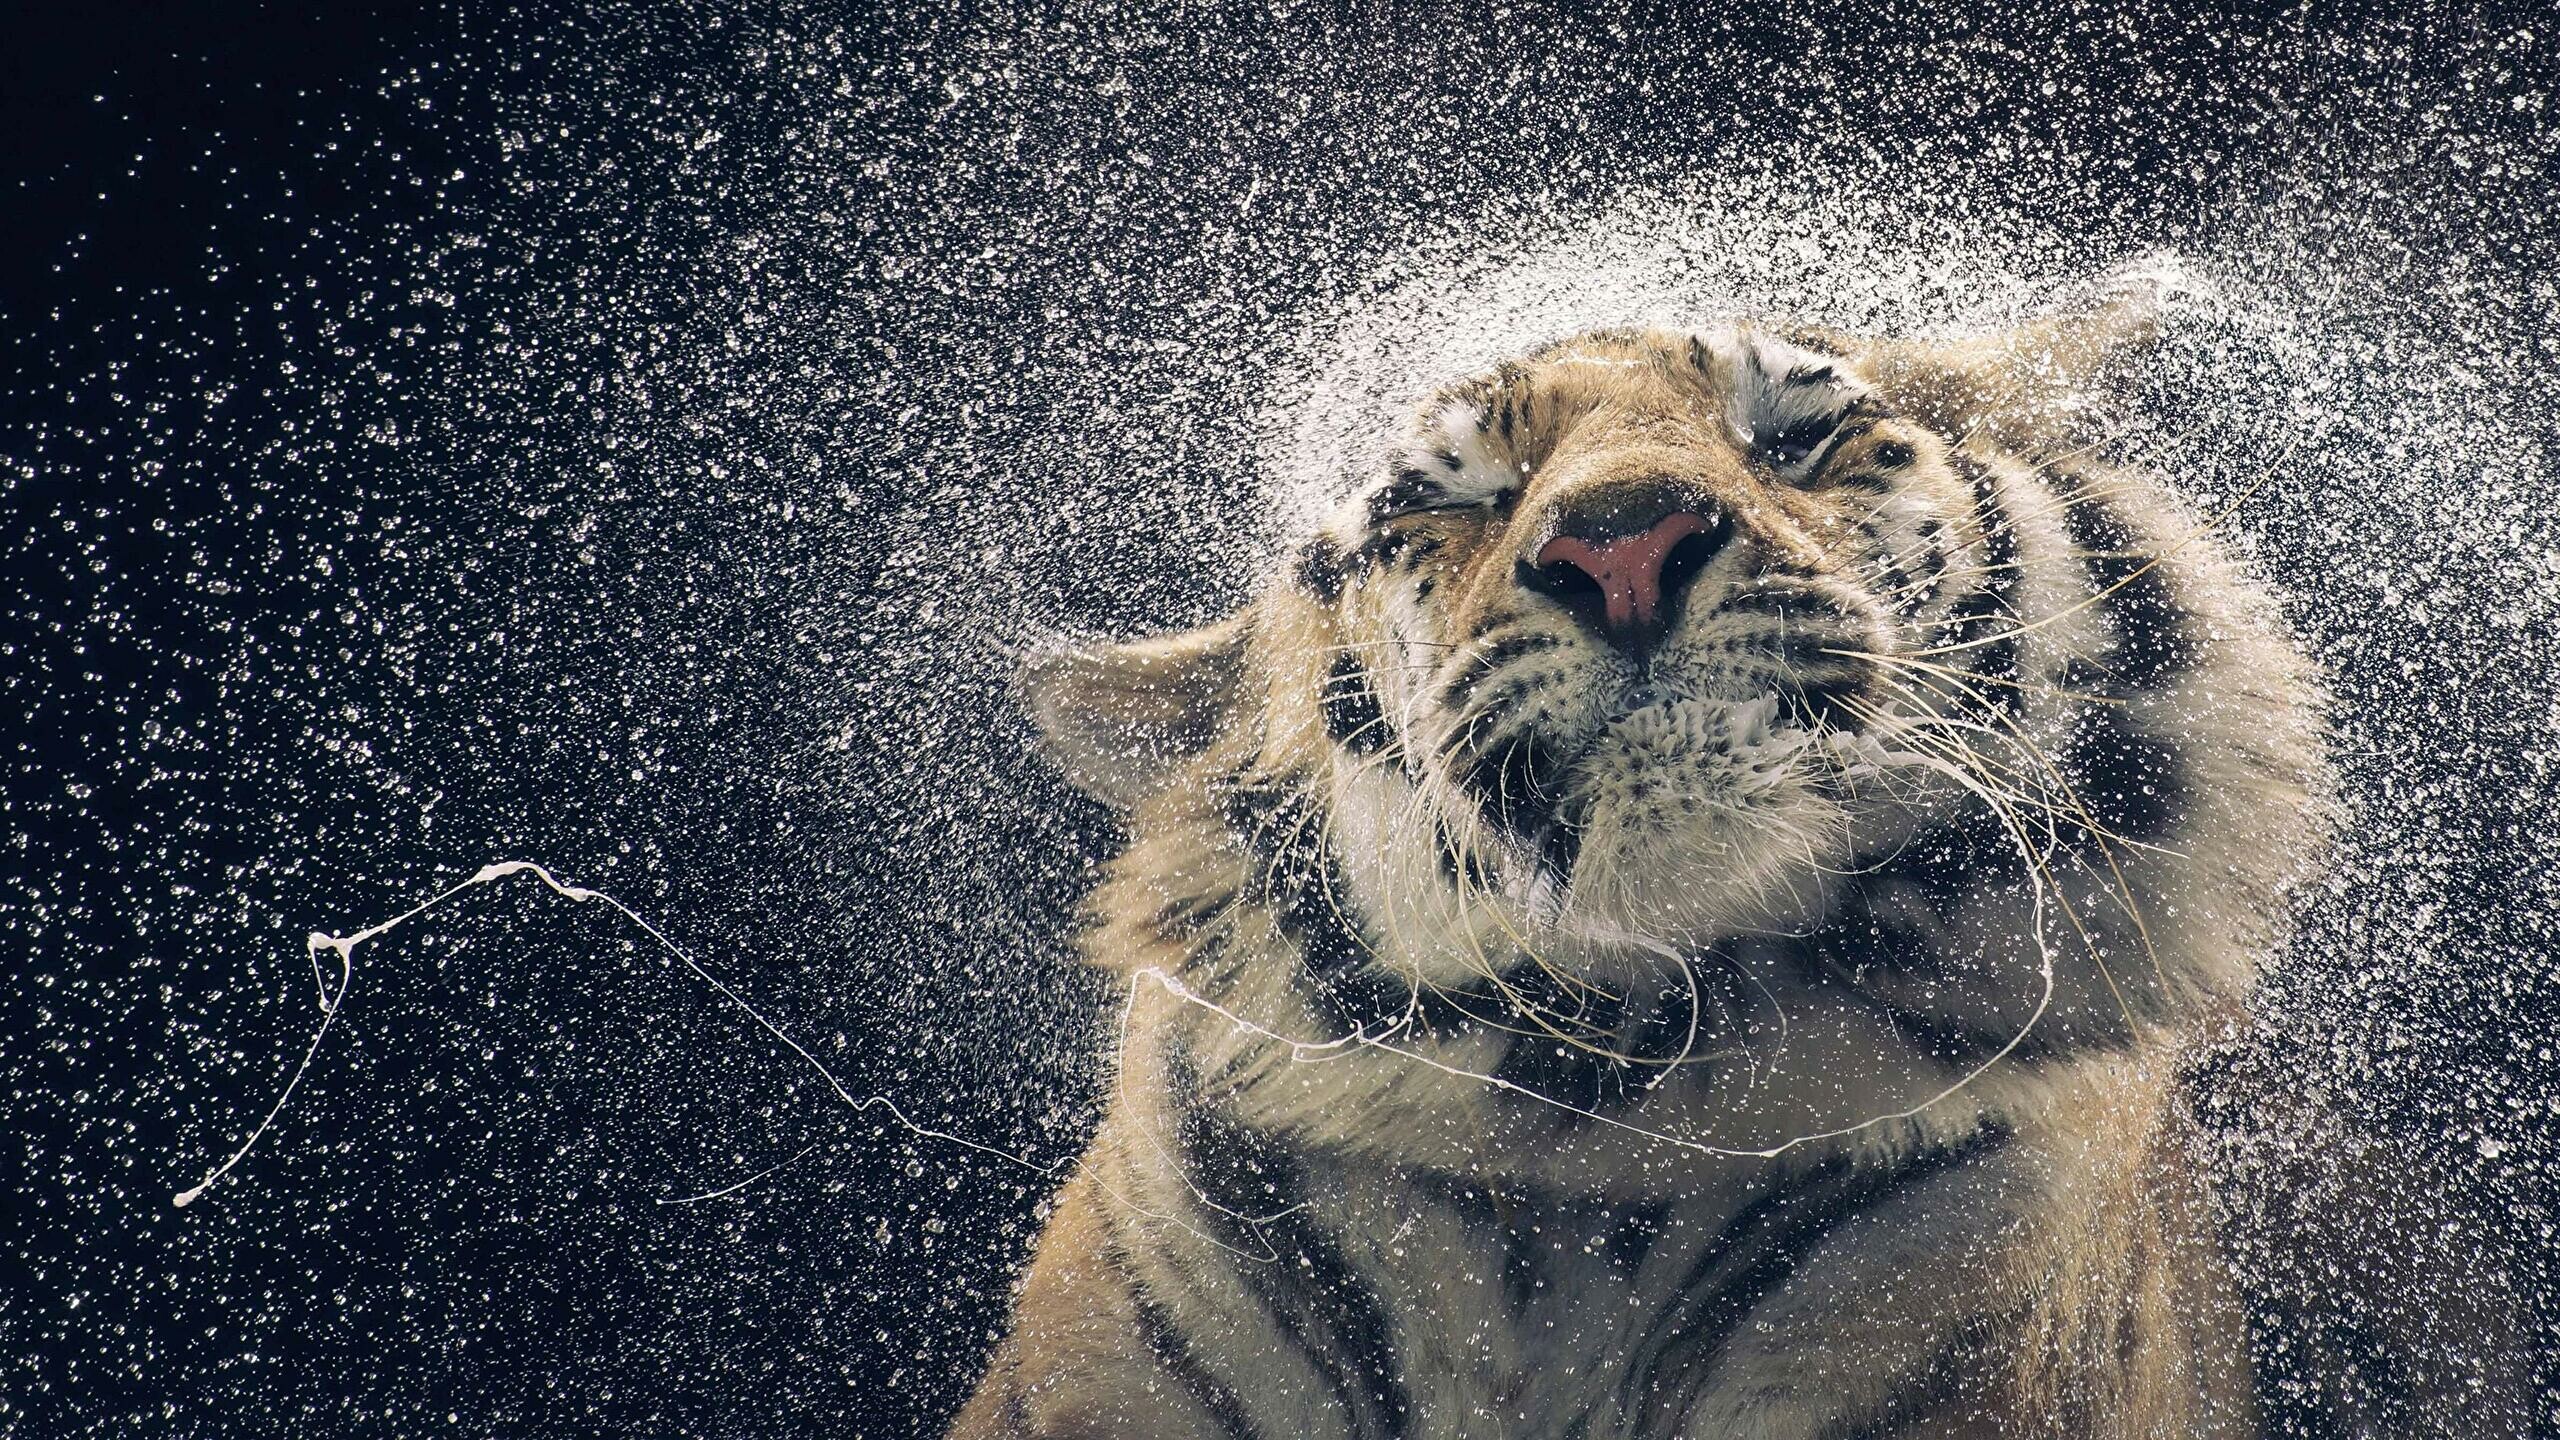 Tiger: Tigers have been known to reach up to 20 years of age in the wild. 2560x1440 HD Background.